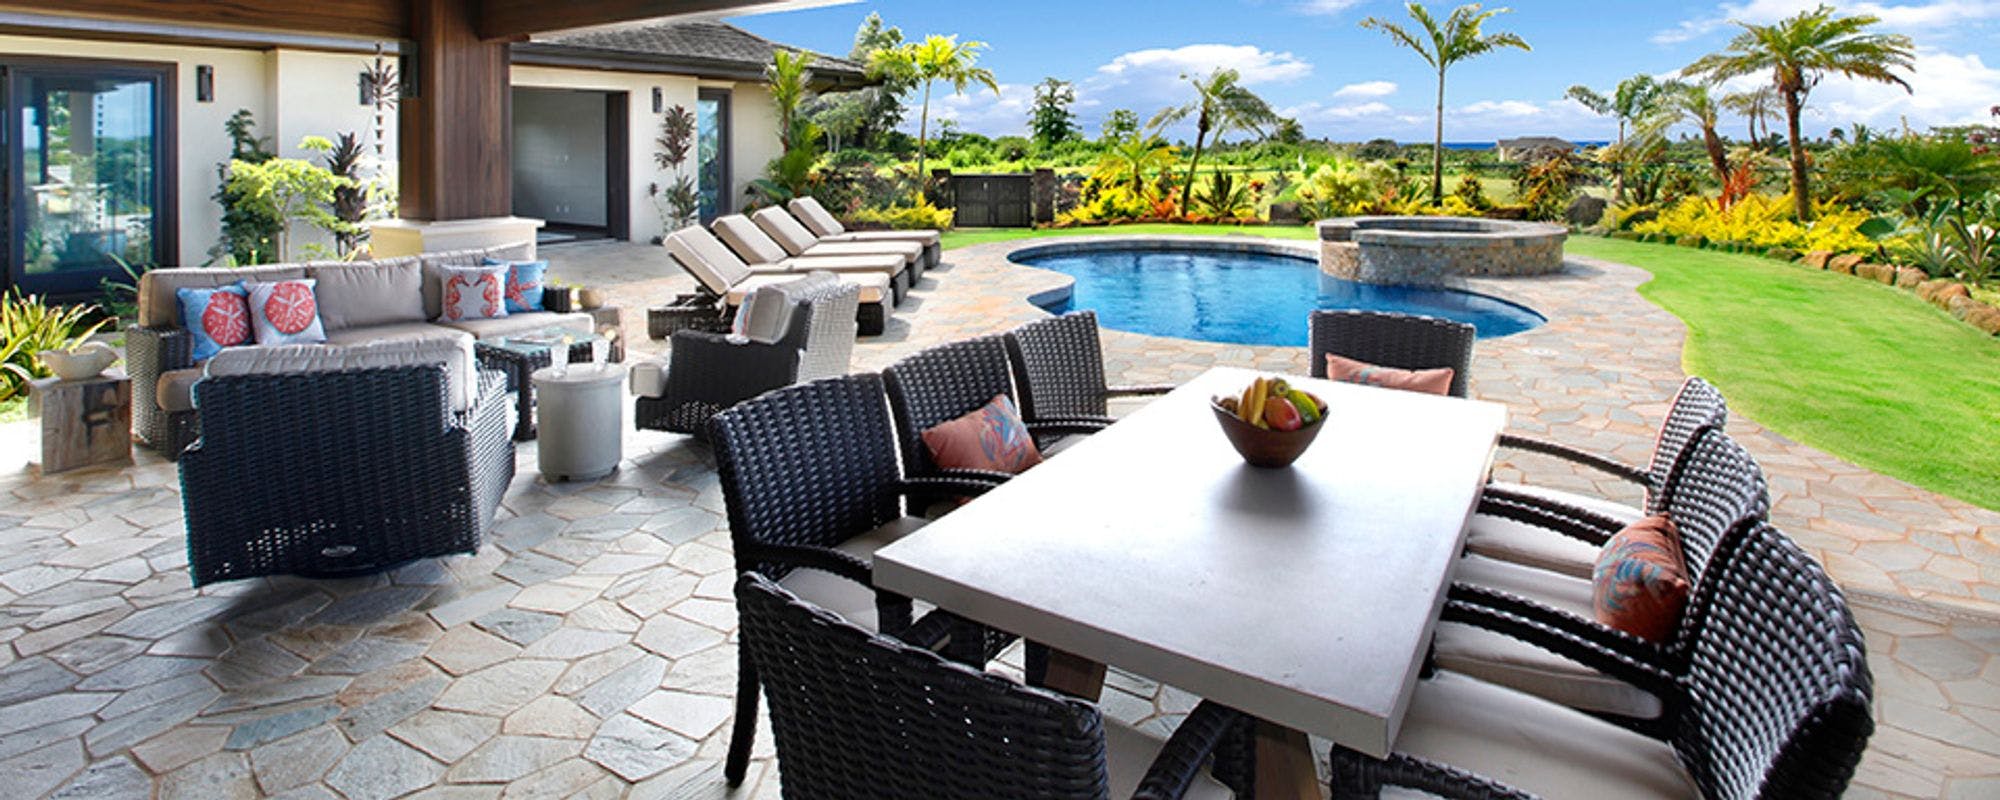 Outdoor living space with private pool at Kauai vacation rental